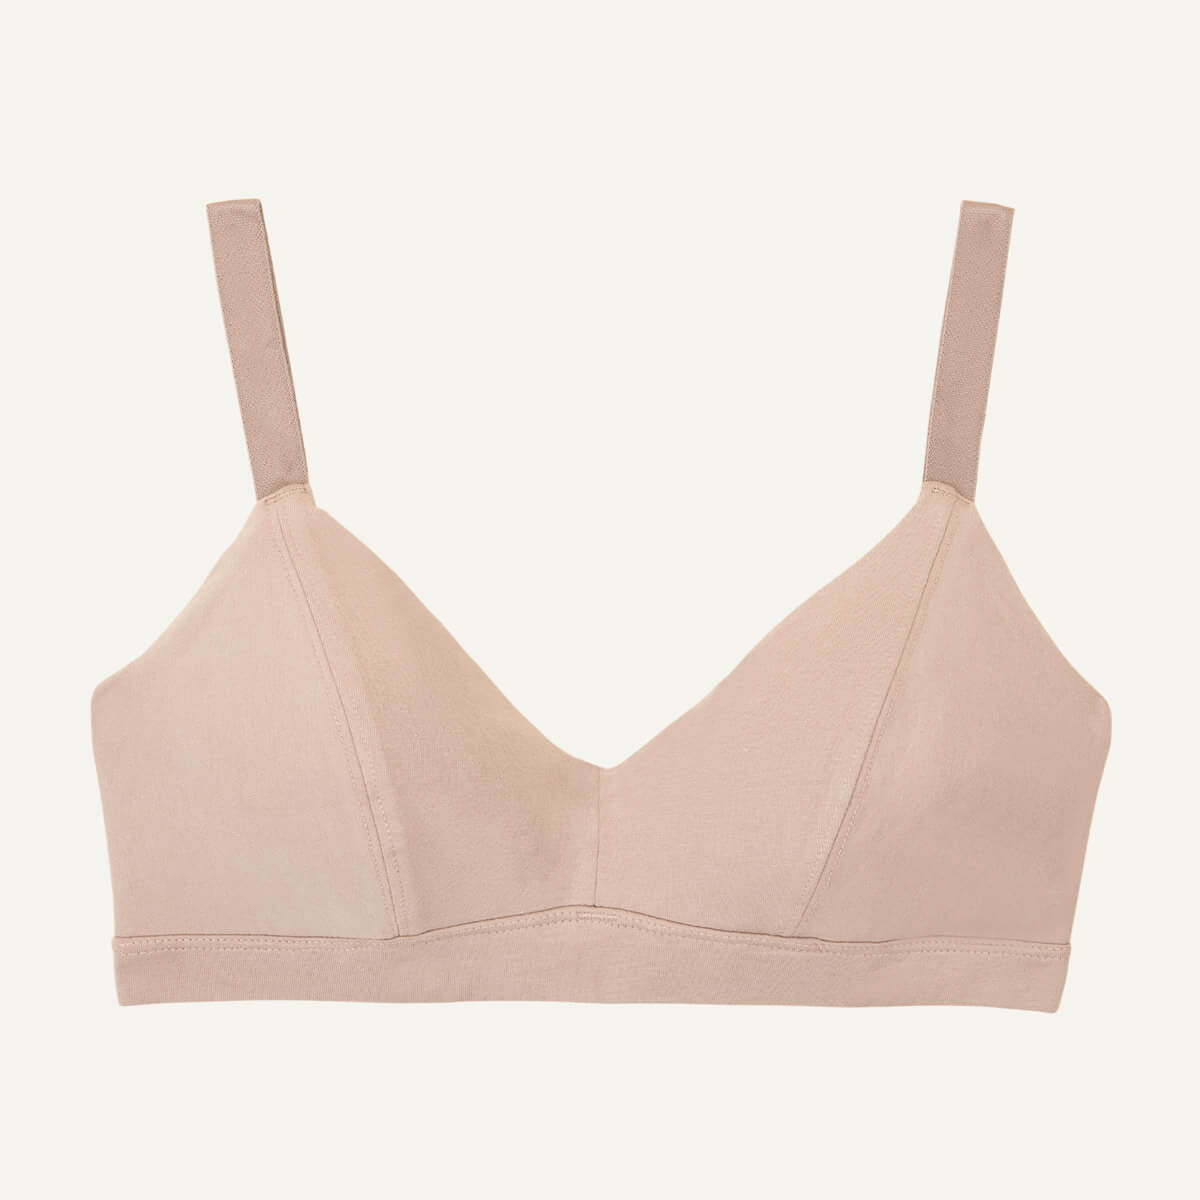 Knickey Bralette Review – Everything You Need to Know About Their